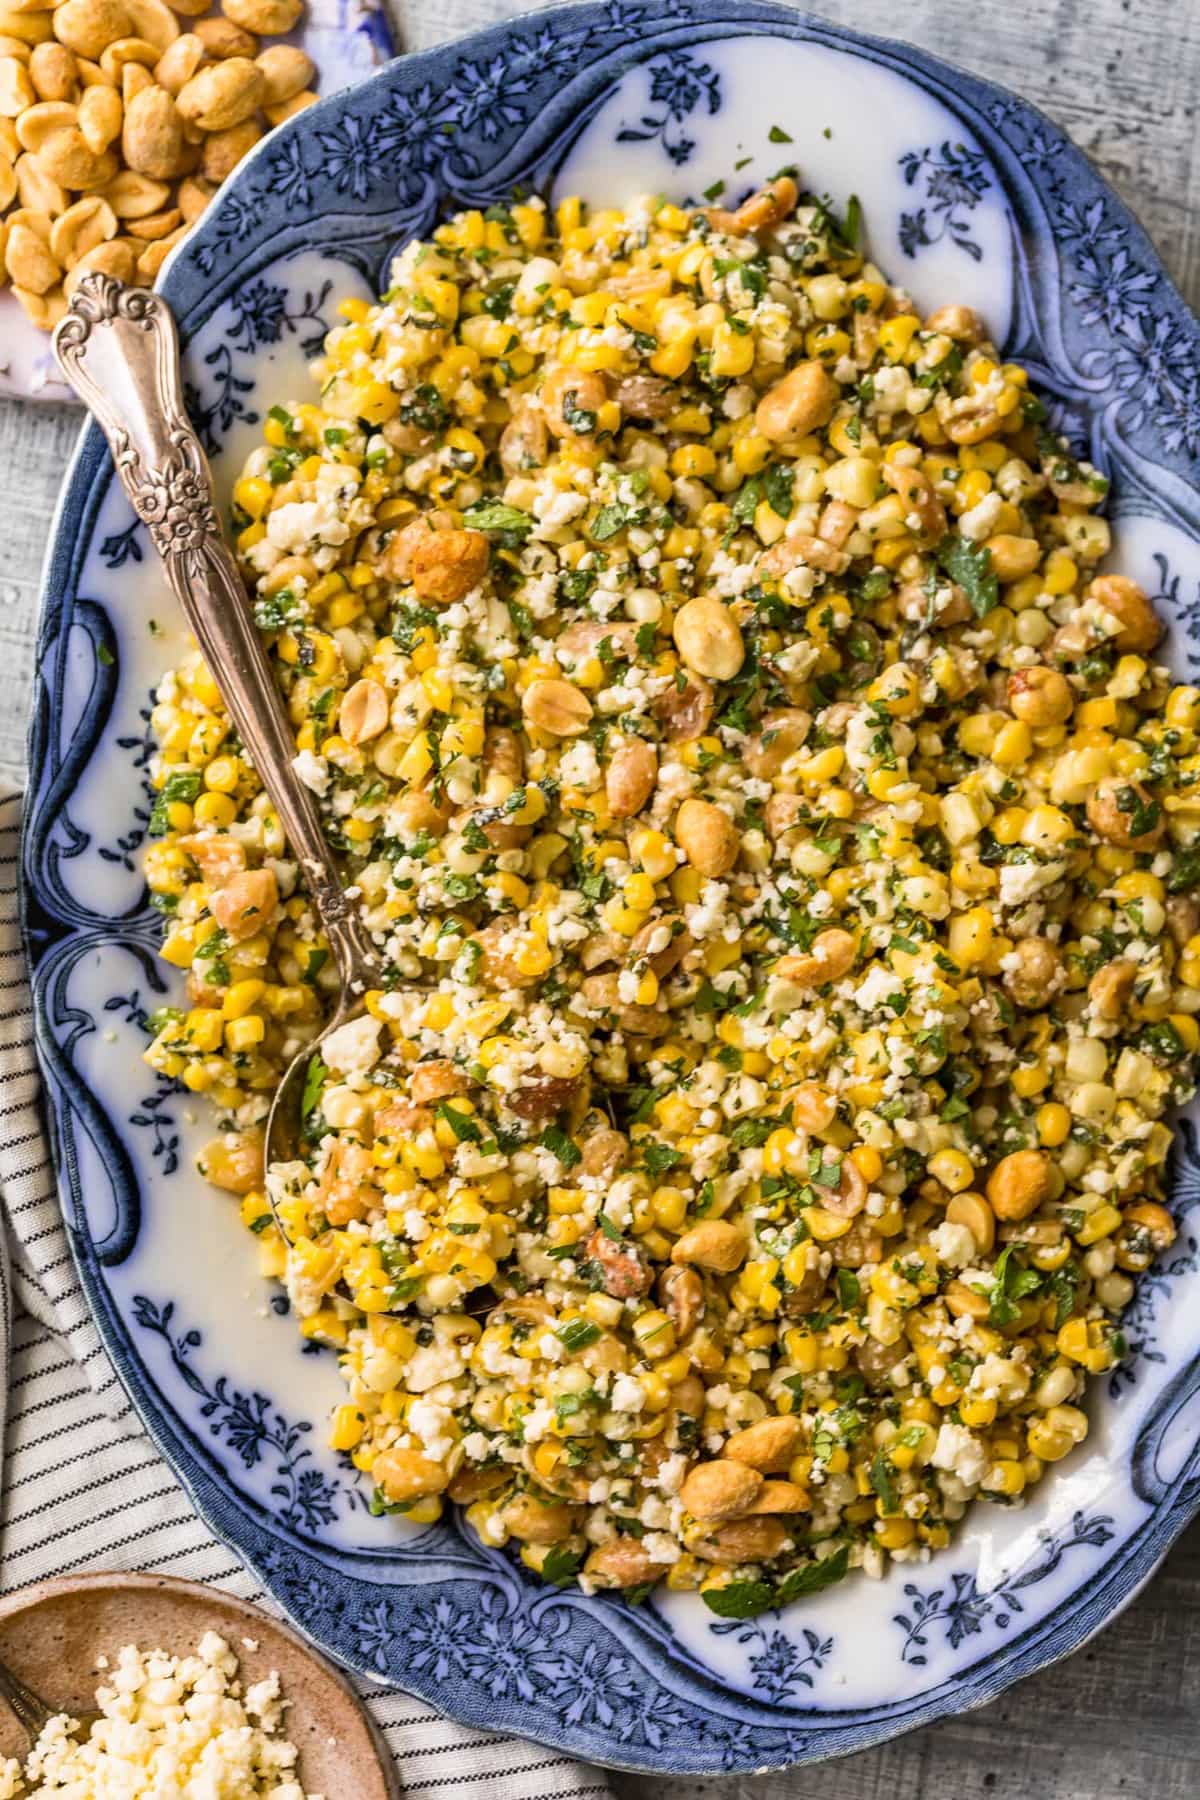 Top shot of a grilled corn salad